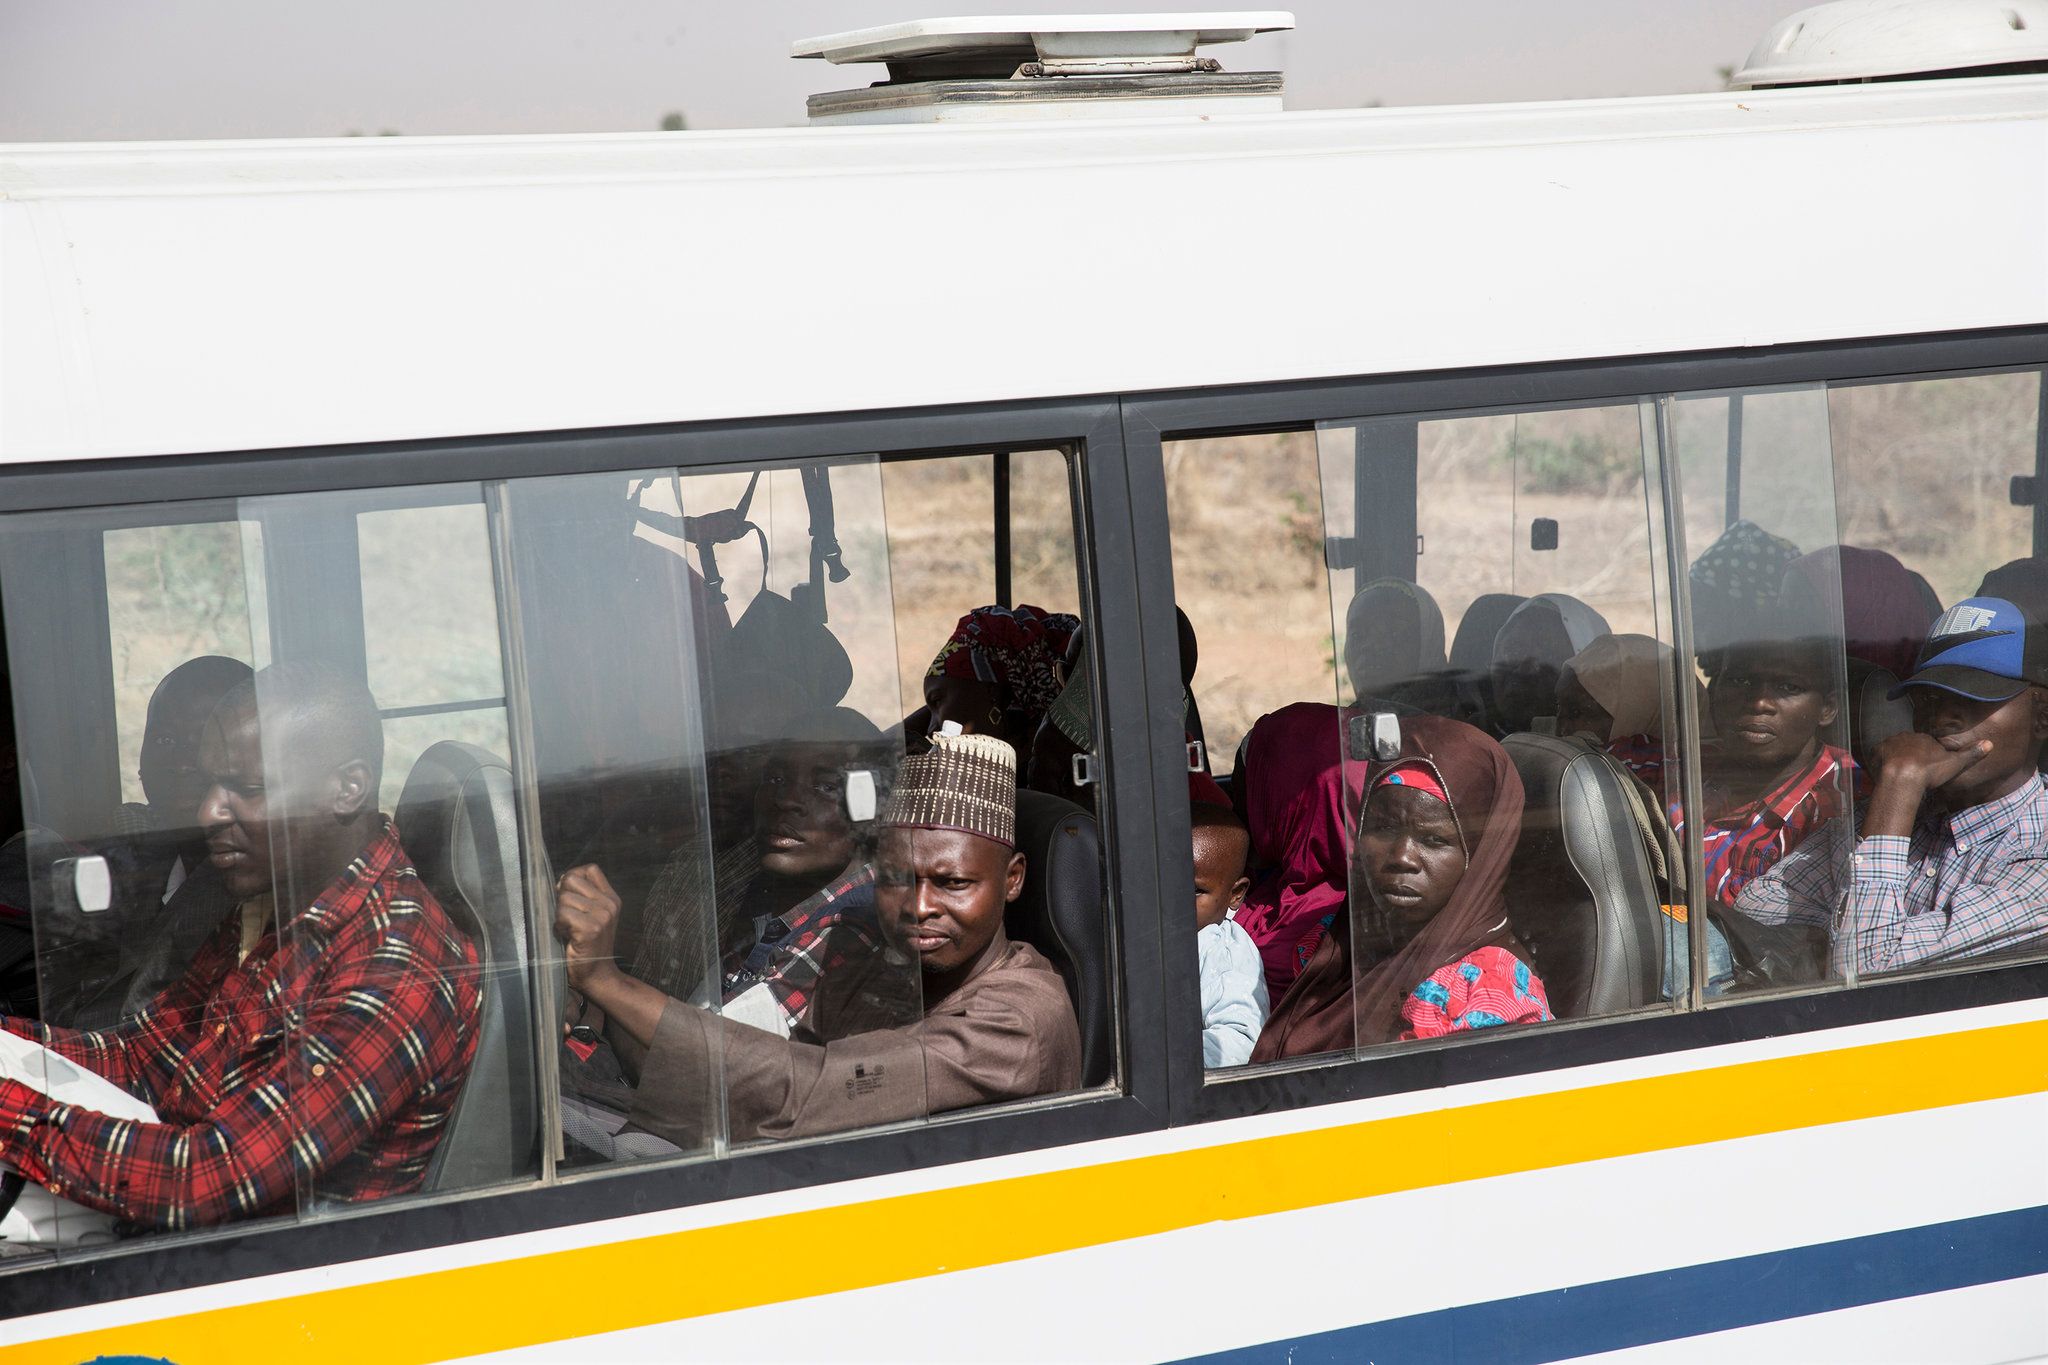 Traveling by bus, rather than in the back of a truck, is a more expensive but more comfortable way to make the risky convoy trip. Image by Glenna Gordon. Nigeria, 2017.